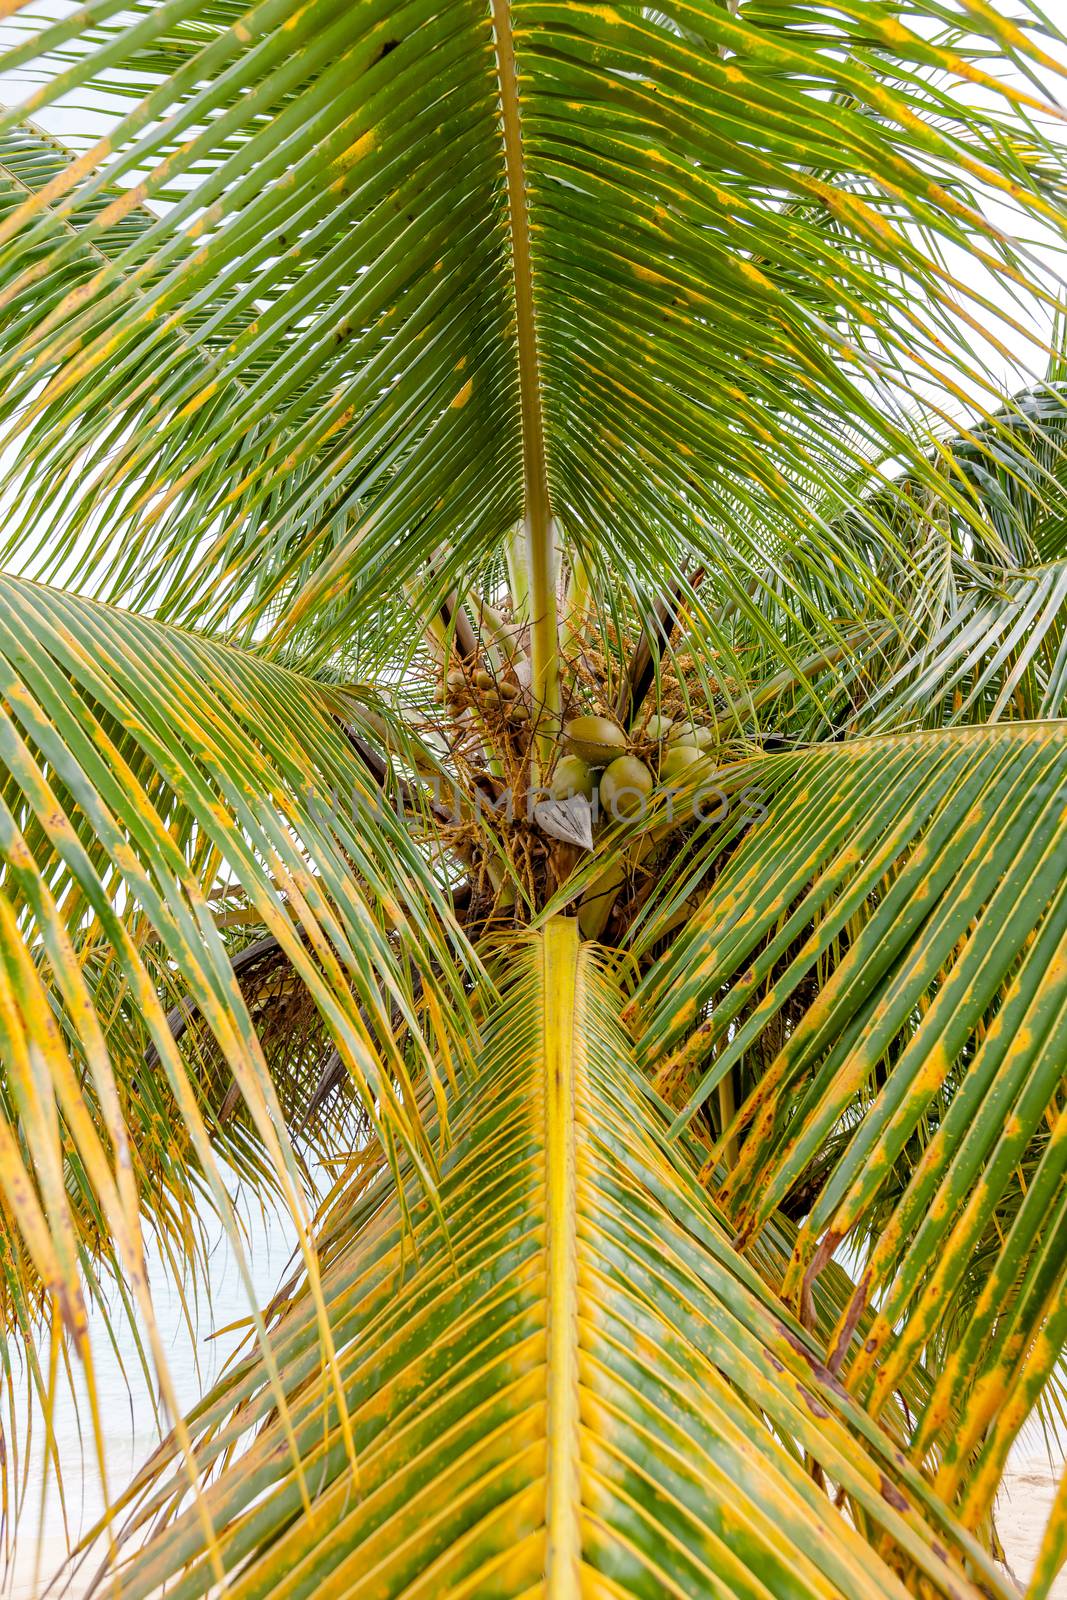 The Sweet Coconut tree with green coconuts